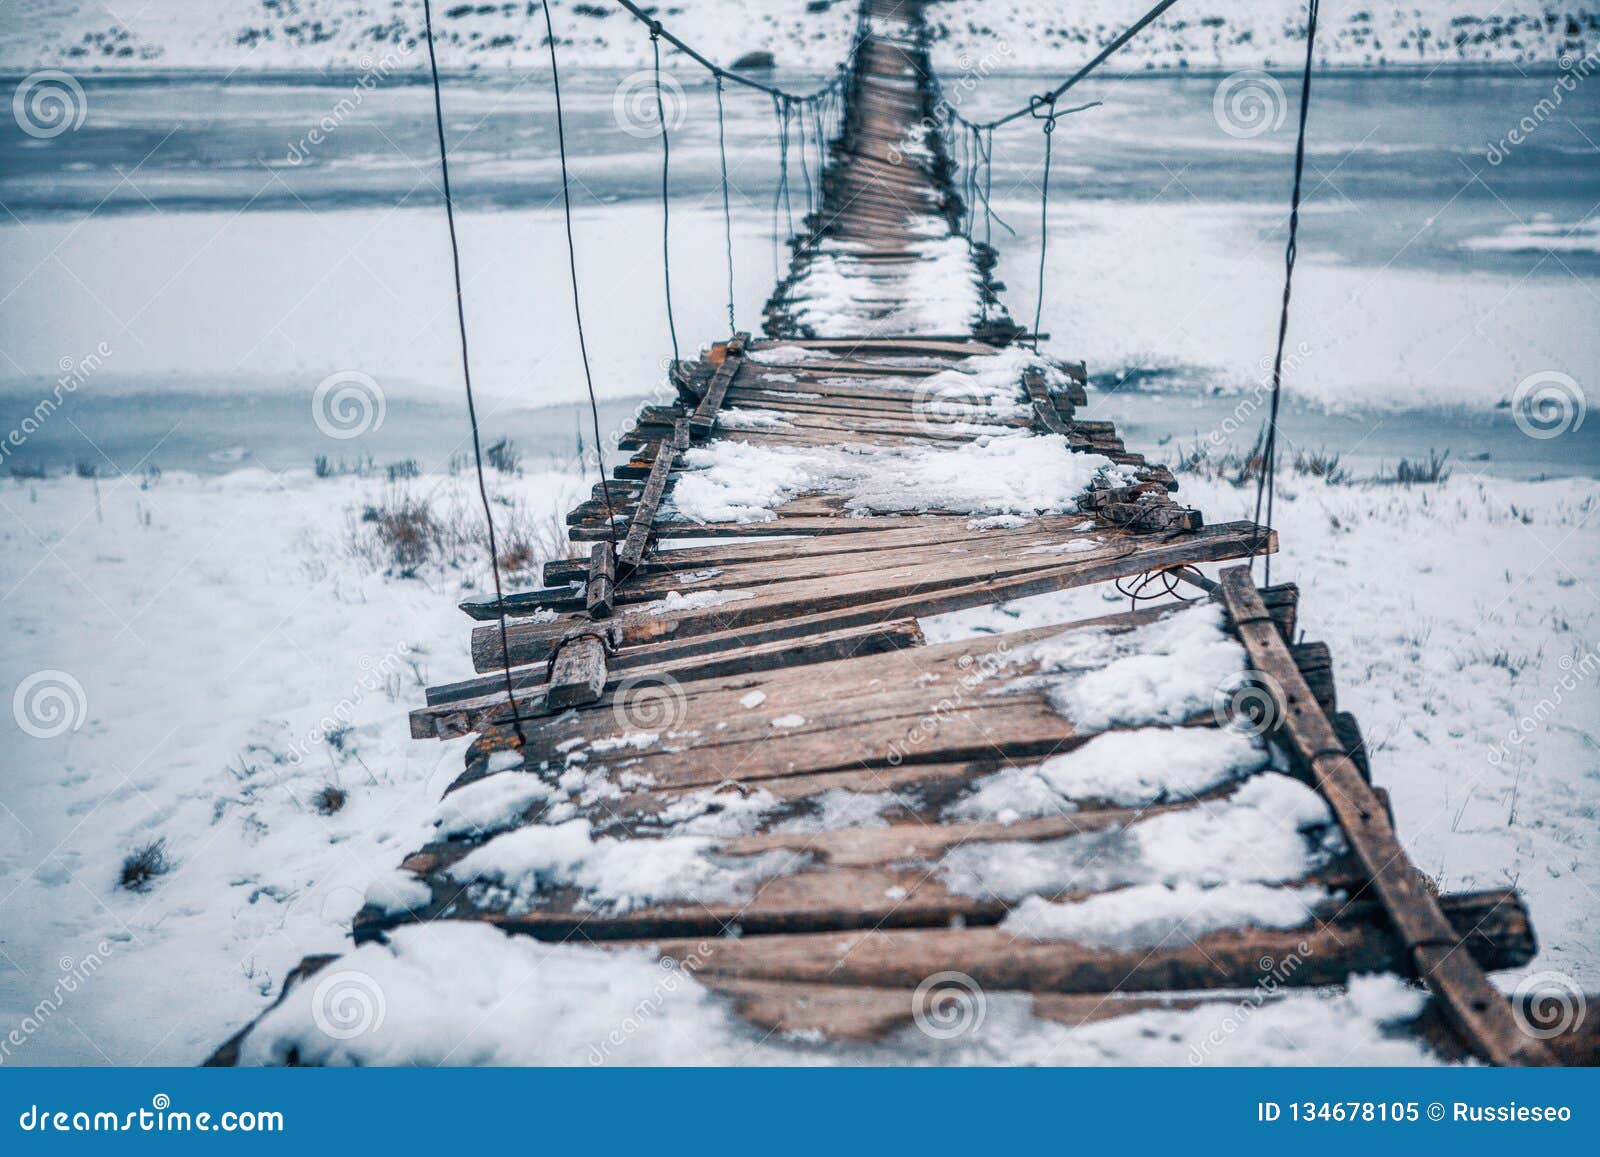 Old wooden hanging path stock image. Image of rural - 134678105